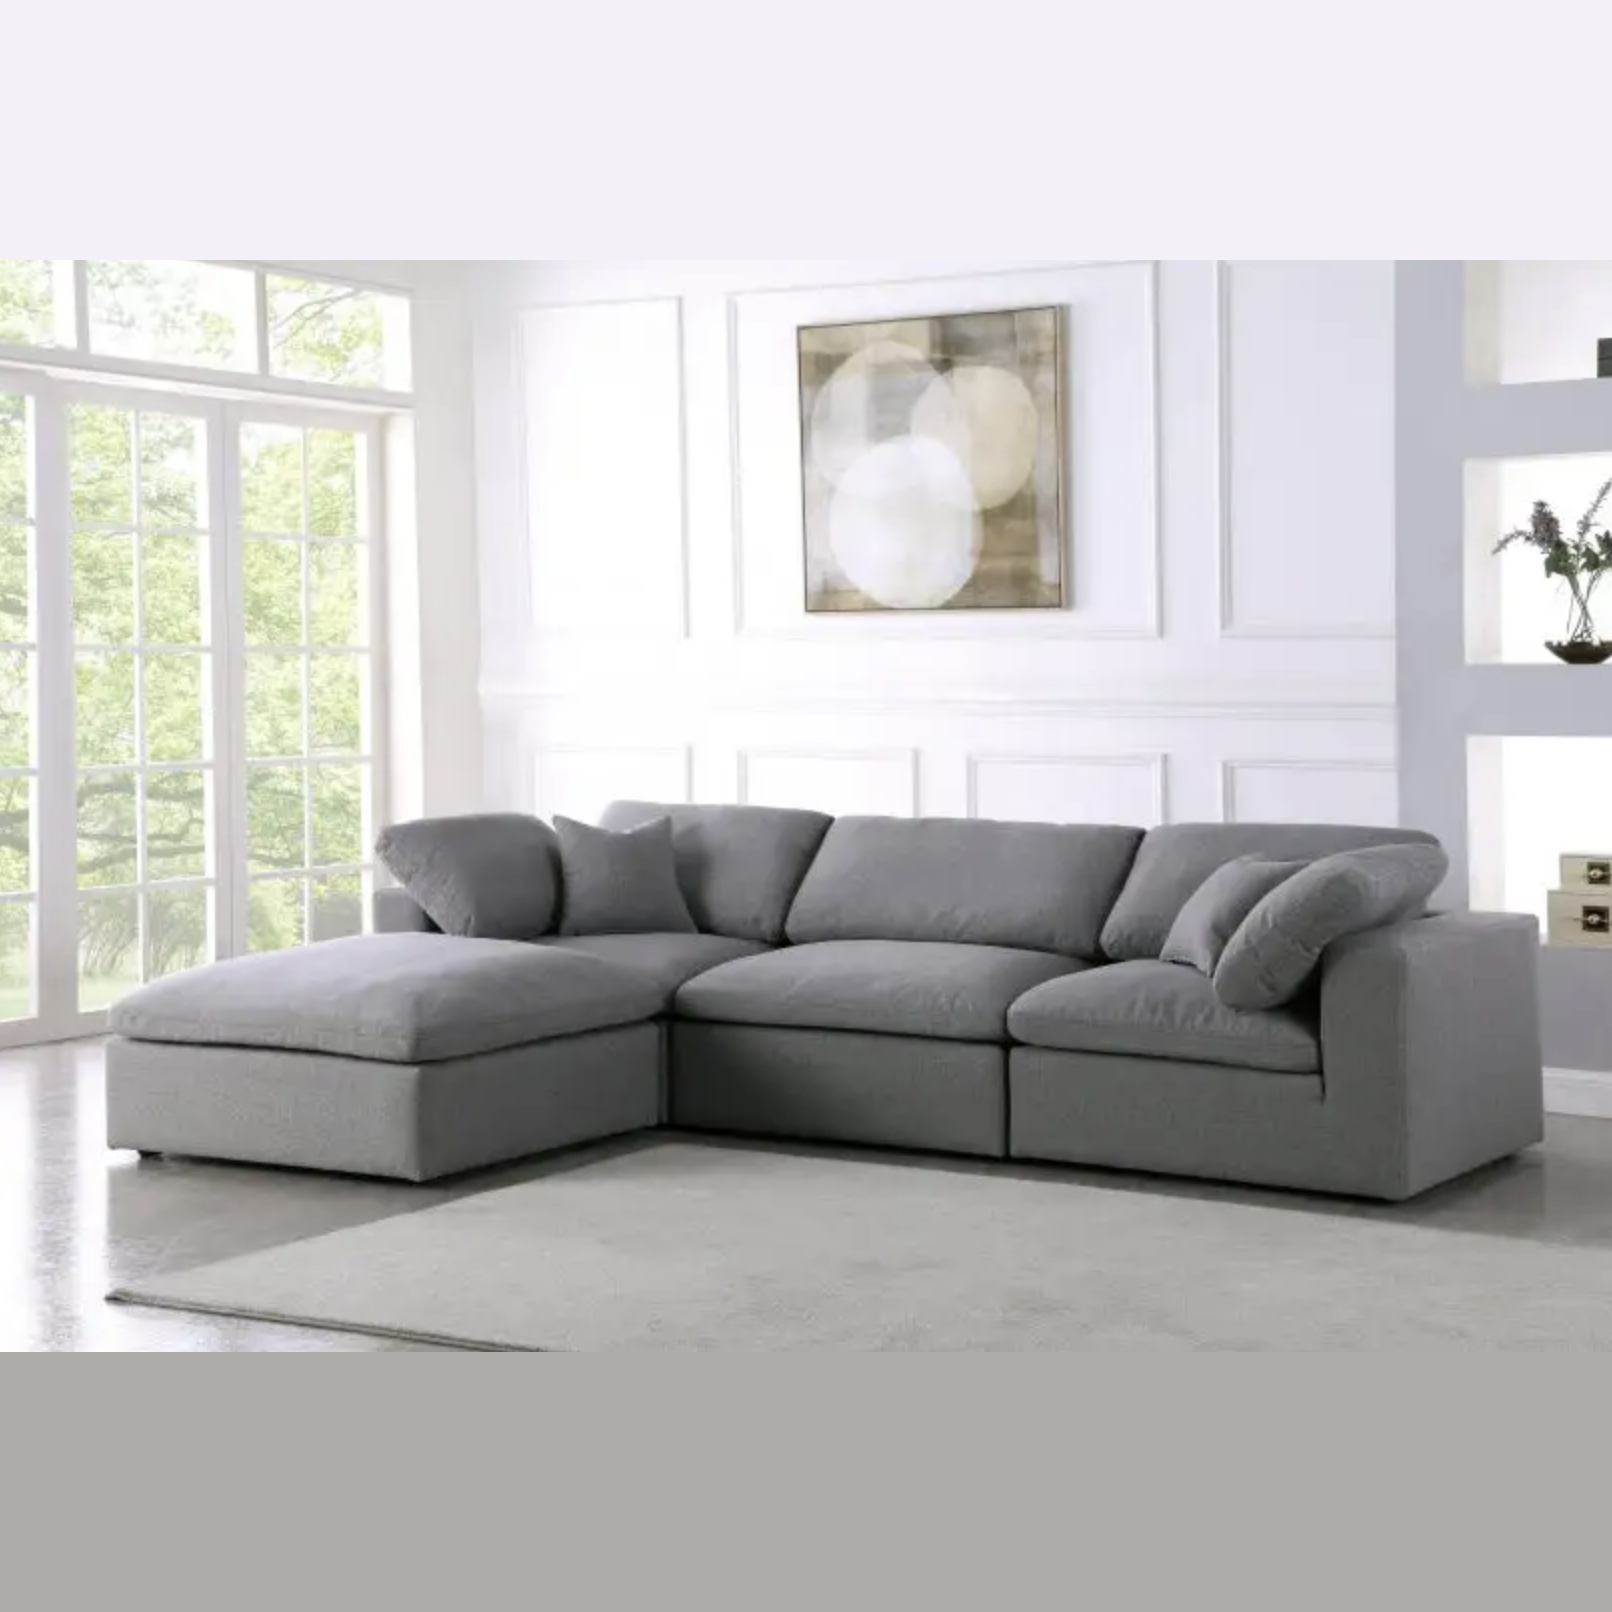 Alluring Sectional Sofa